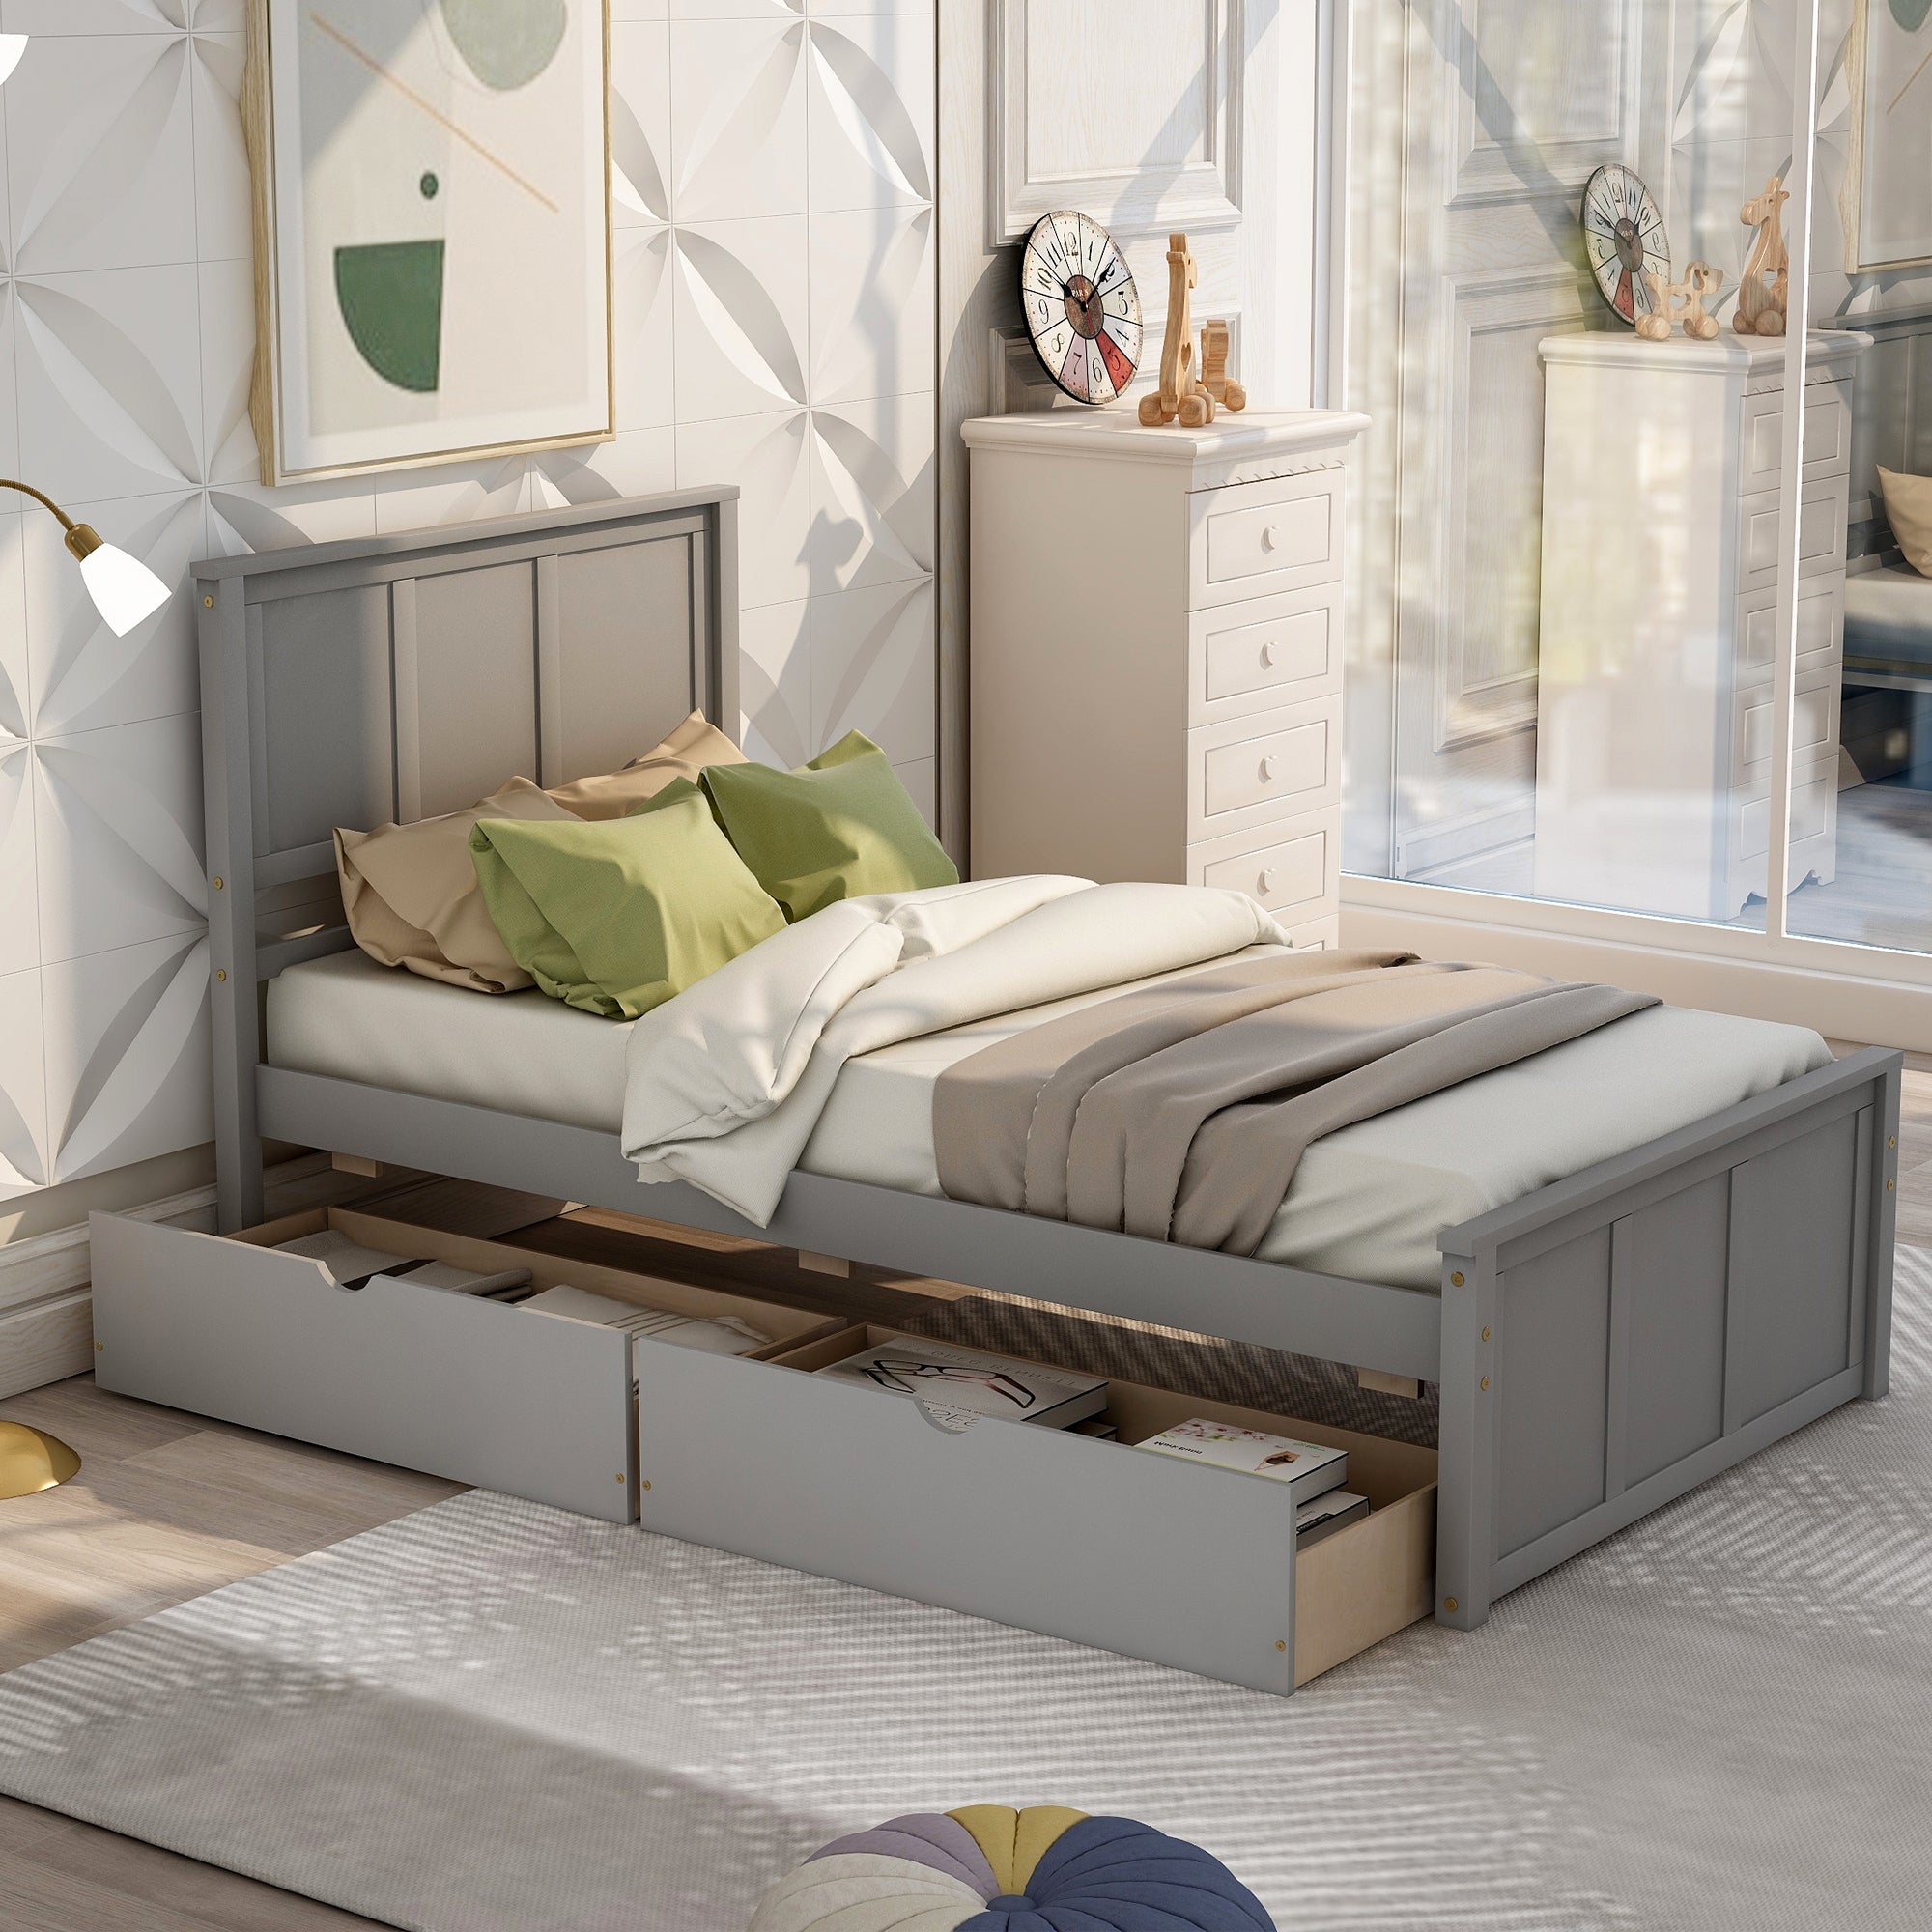 New SKU: WF283062AAE - Gray Twin Platform Storage Bed with 2 Drawers on Wheels - Space-Saving Solution